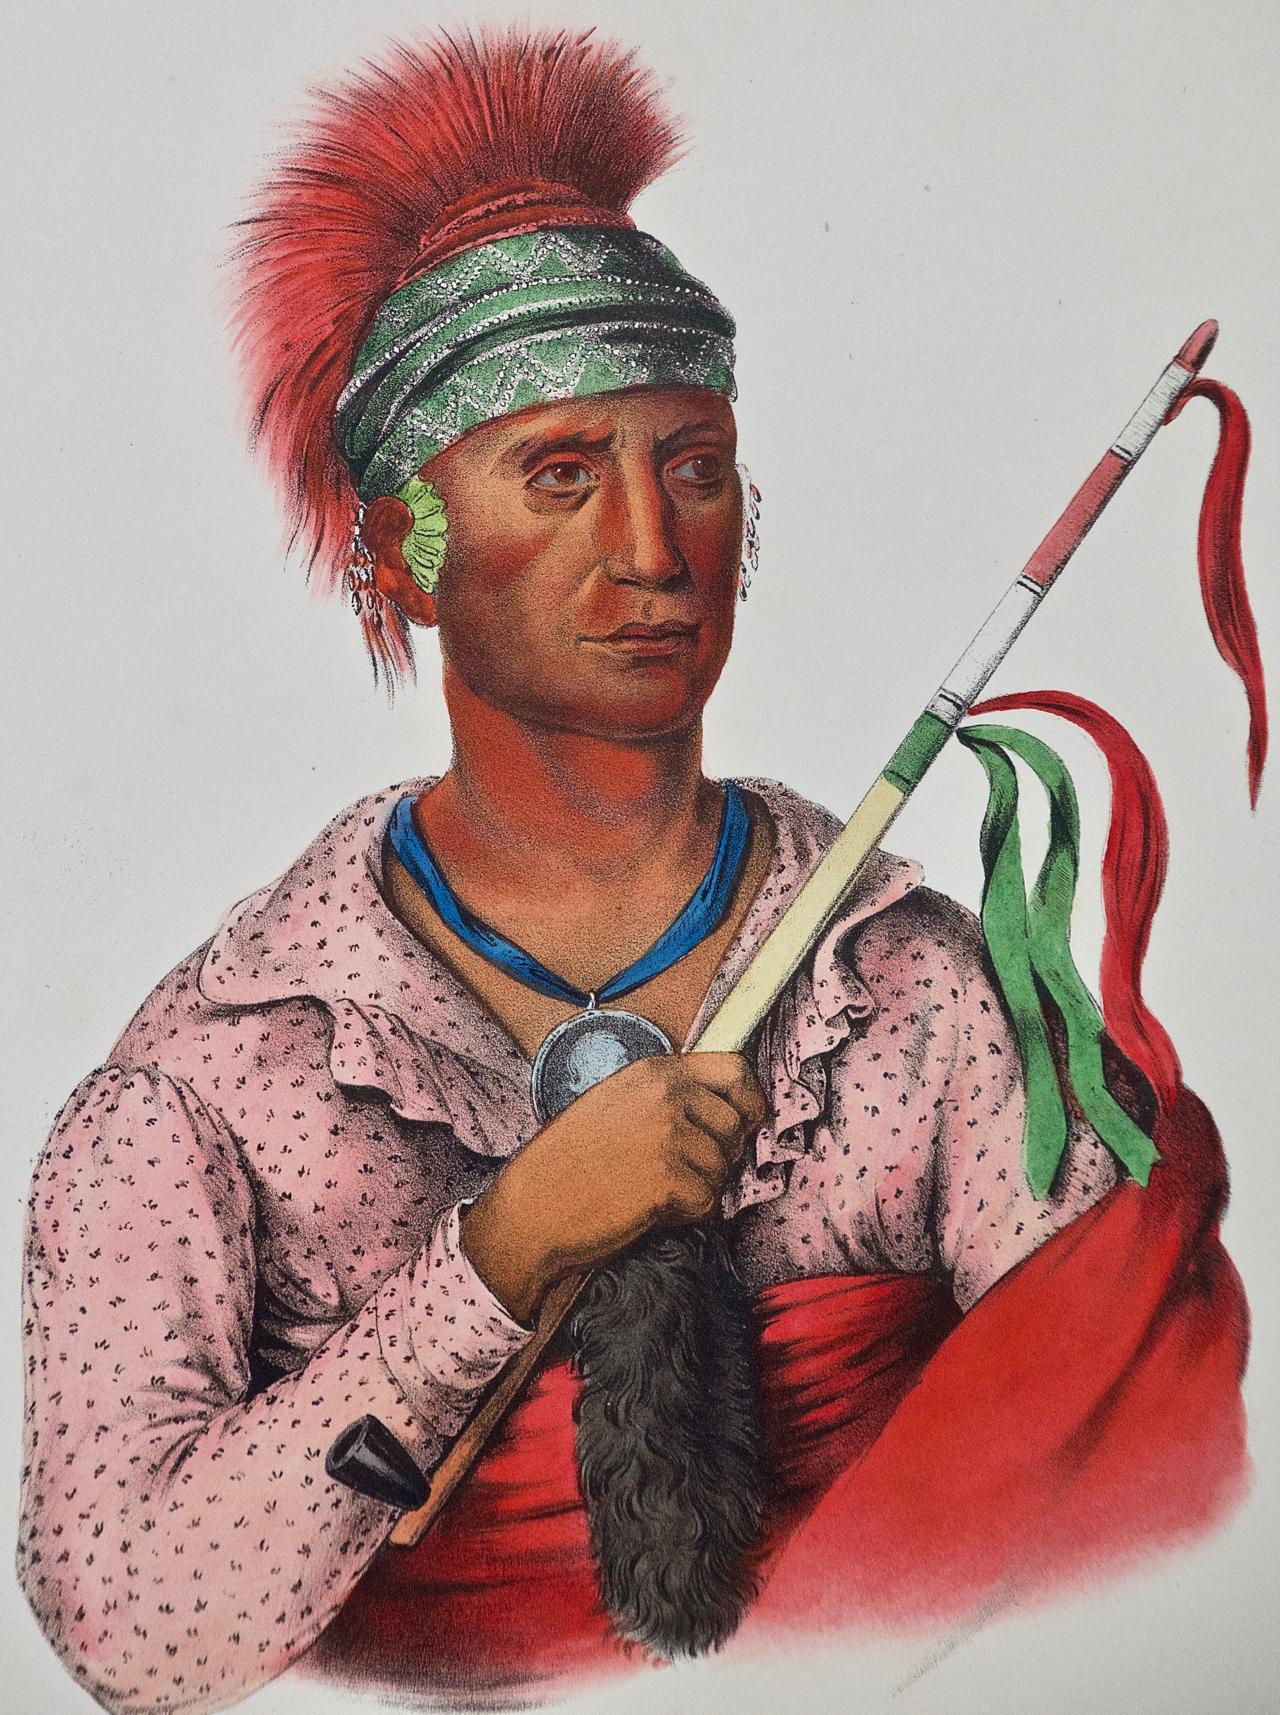 This is an original 19th century hand-colored McKenney and Hall engraving of a Native American entitled 